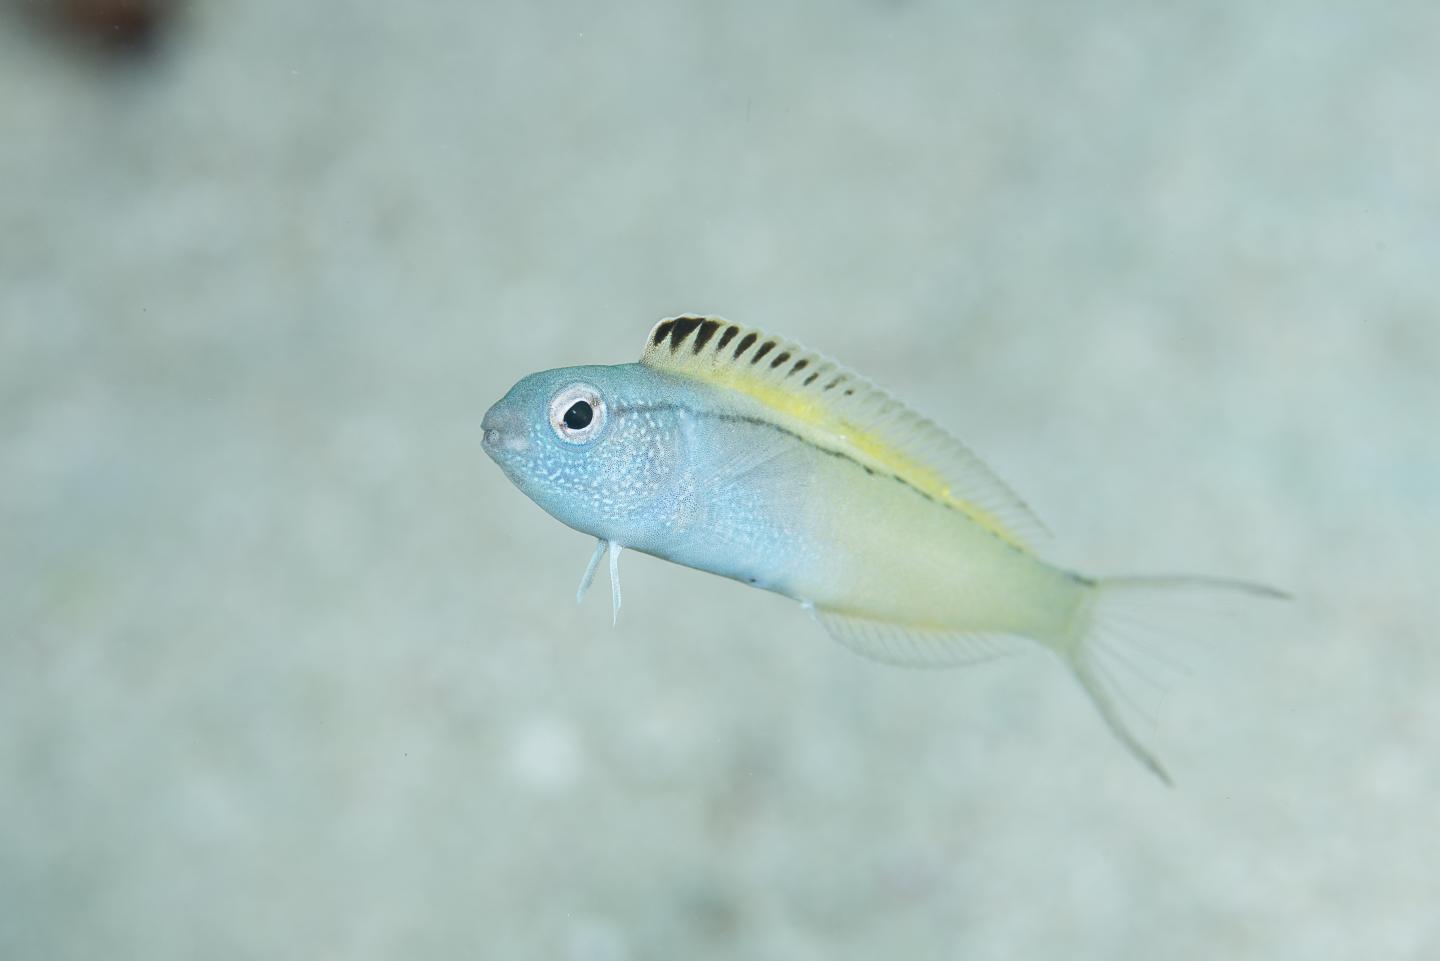 This timid little fish escapes predators by injecting them with